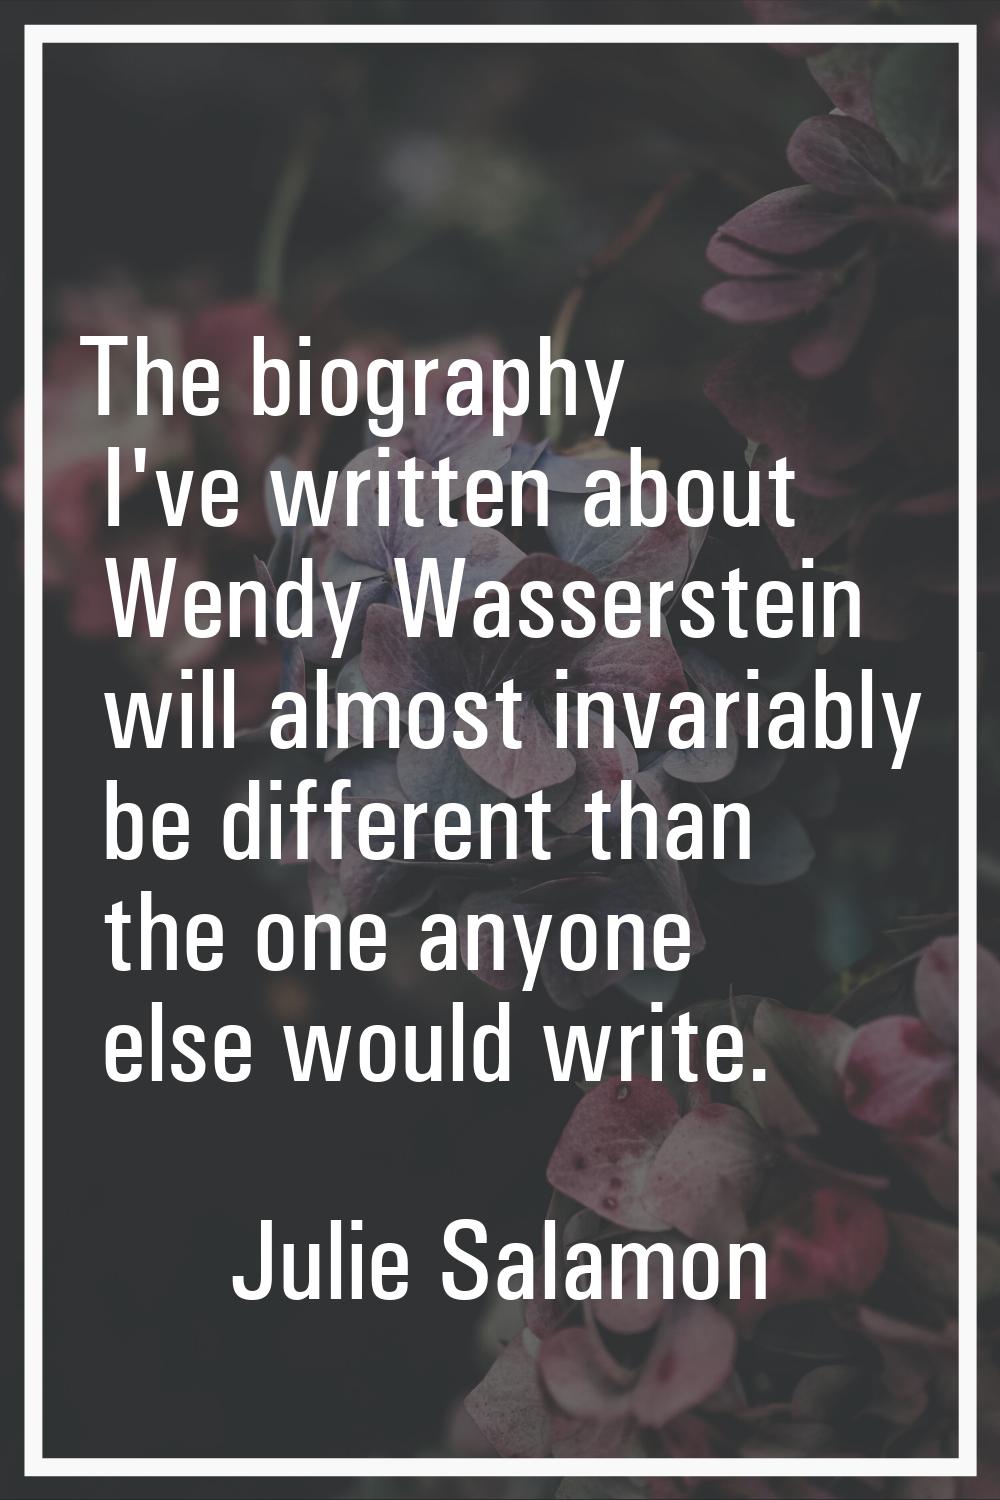 The biography I've written about Wendy Wasserstein will almost invariably be different than the one